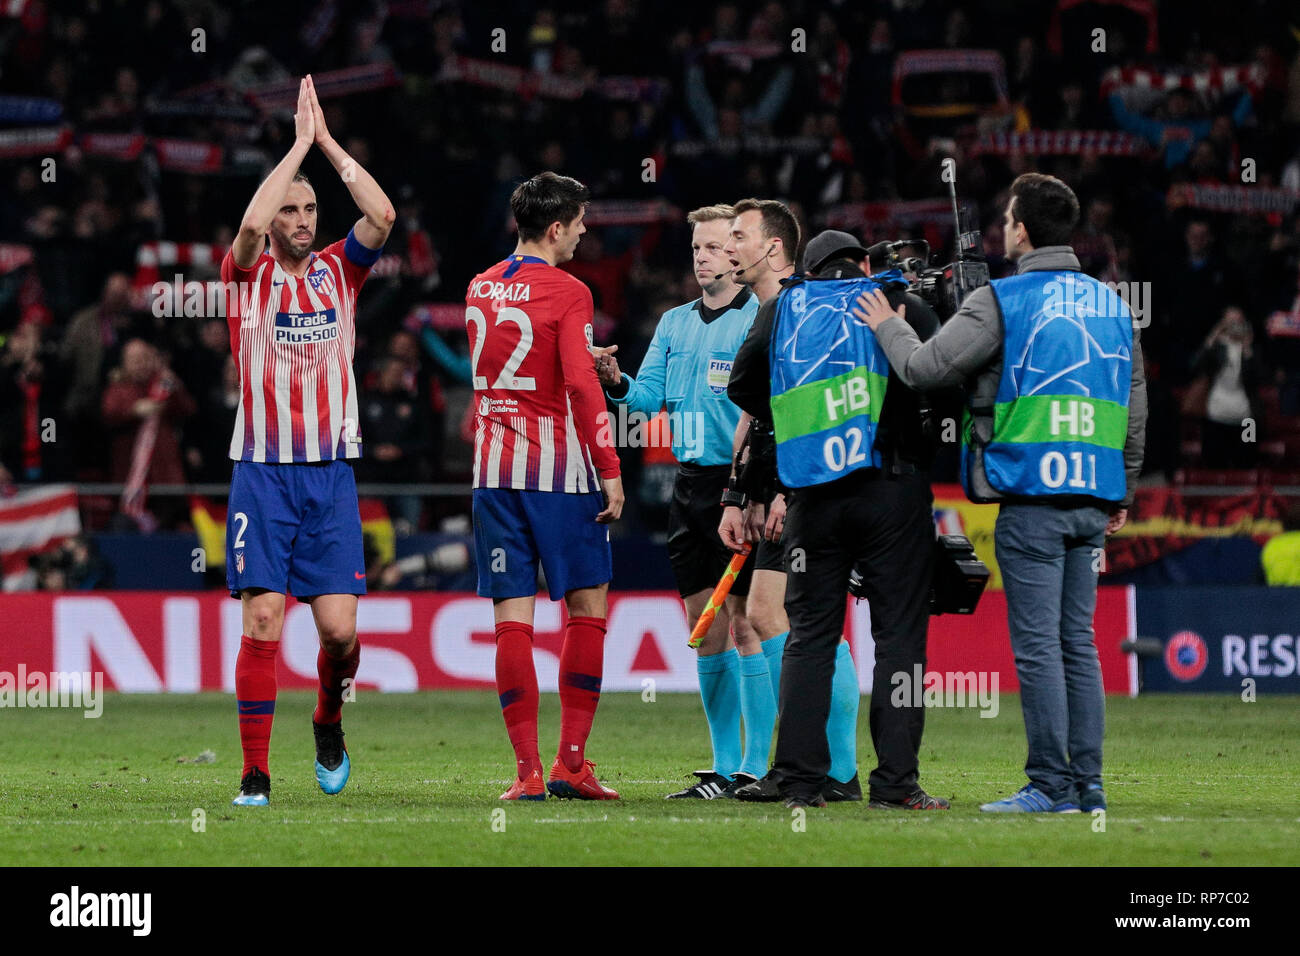 Atletico de Madrid's Diego Godin seen celebrating during the UEFA Champions League match, Round of 16, 1st leg between Atletico de Madrid and Juventus at Wanda Metropolitano Stadium in Madrid, Spain. Stock Photo